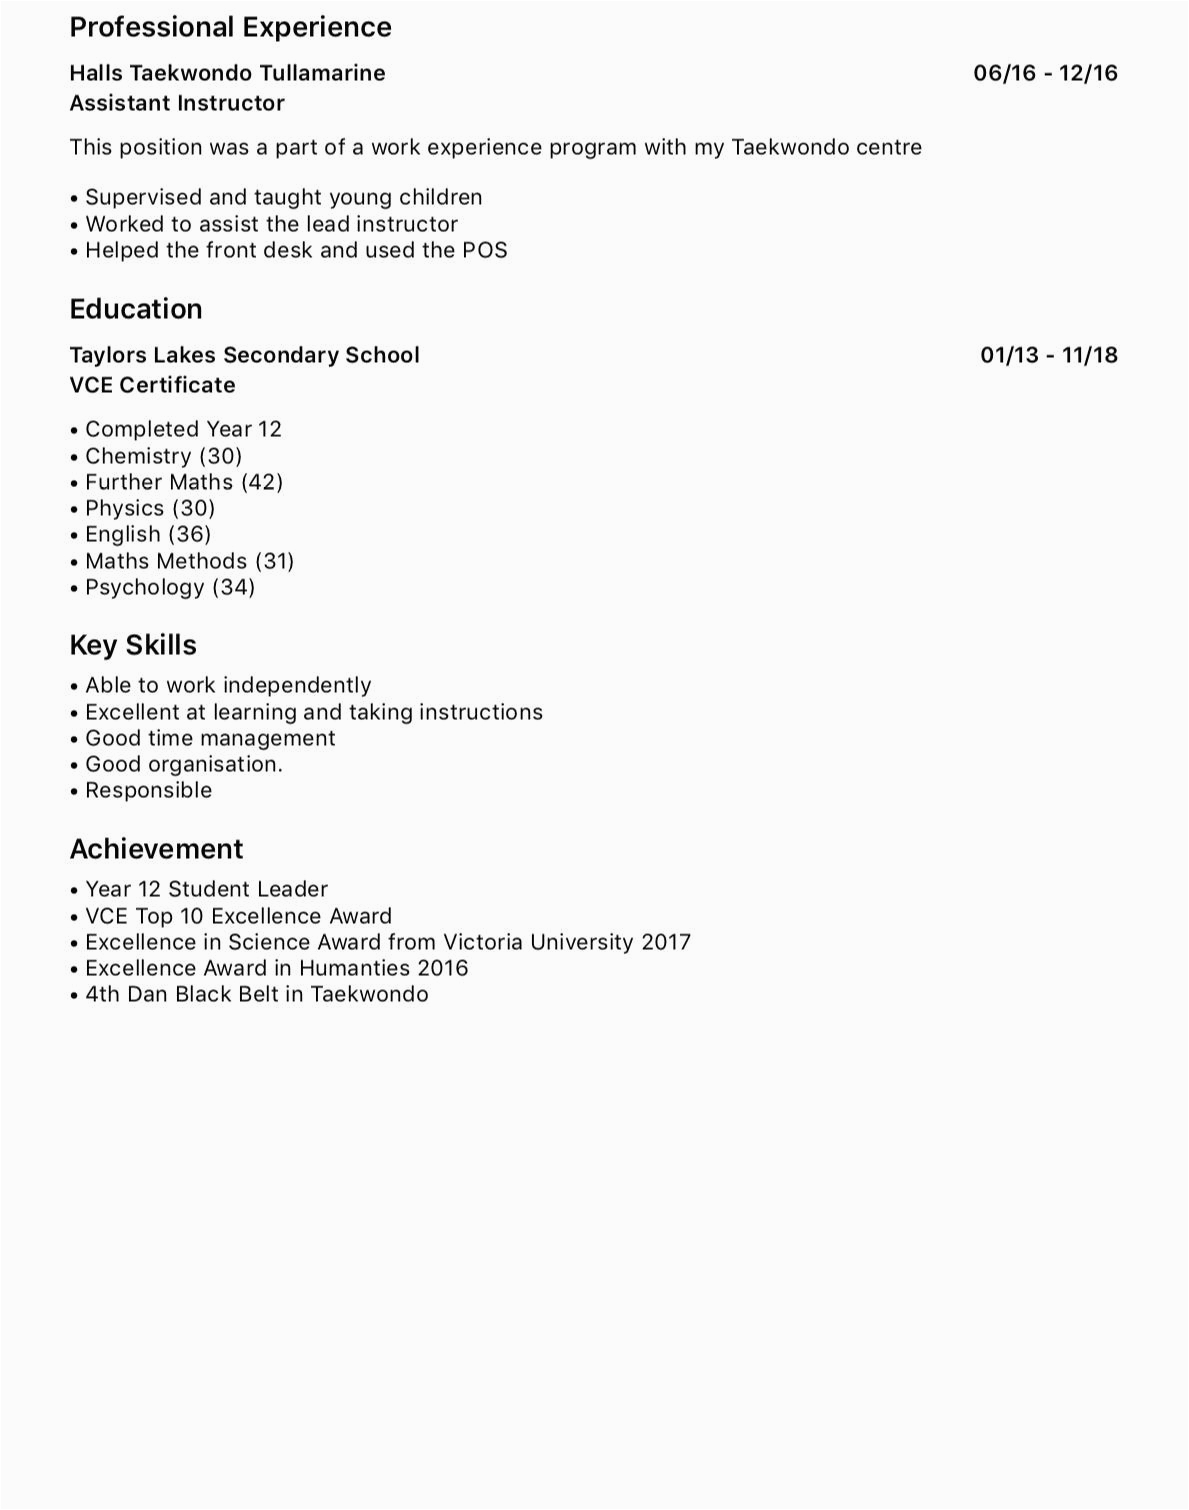 Resume Template for 18 Year Old 18 Years Old with Essentially No Experience and Really